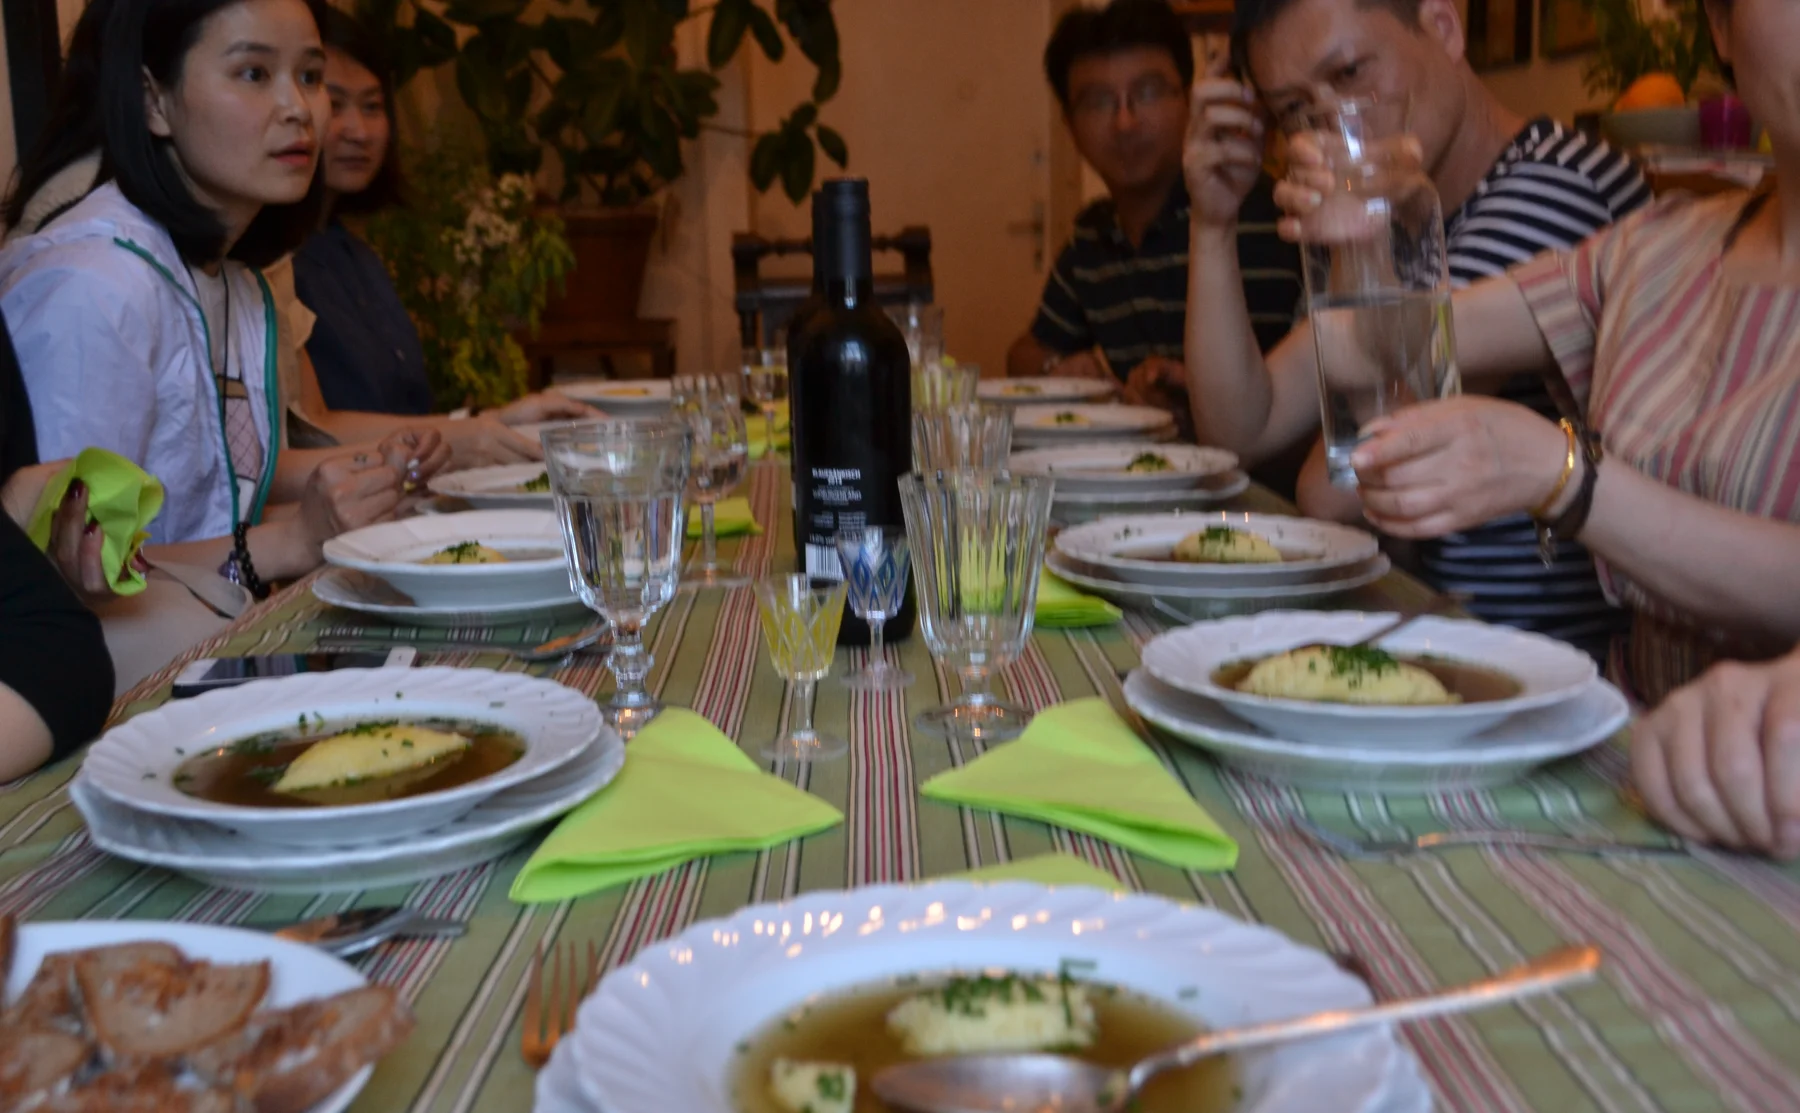 Enjoy an Authentic Austrian Dinner in a Cozy Viennese Home - 944419